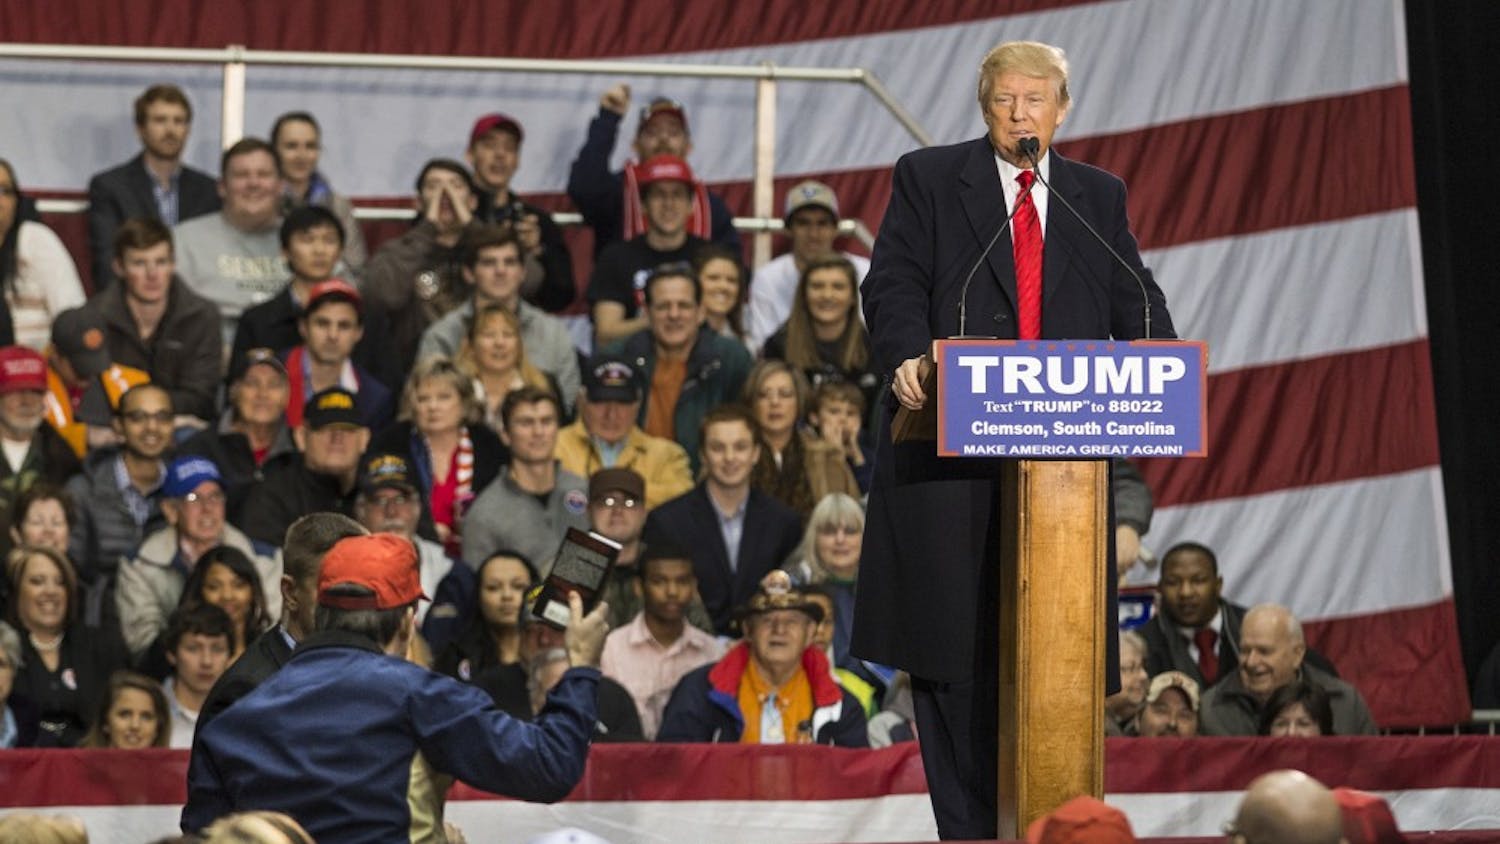 Presidential hopeful Donald J. Trump addresses economic concerns and answers audience questions at the T. Ed Garrison Arena in Clemson, South Carolina. Pictured: Jim Yates from Laurens, SC